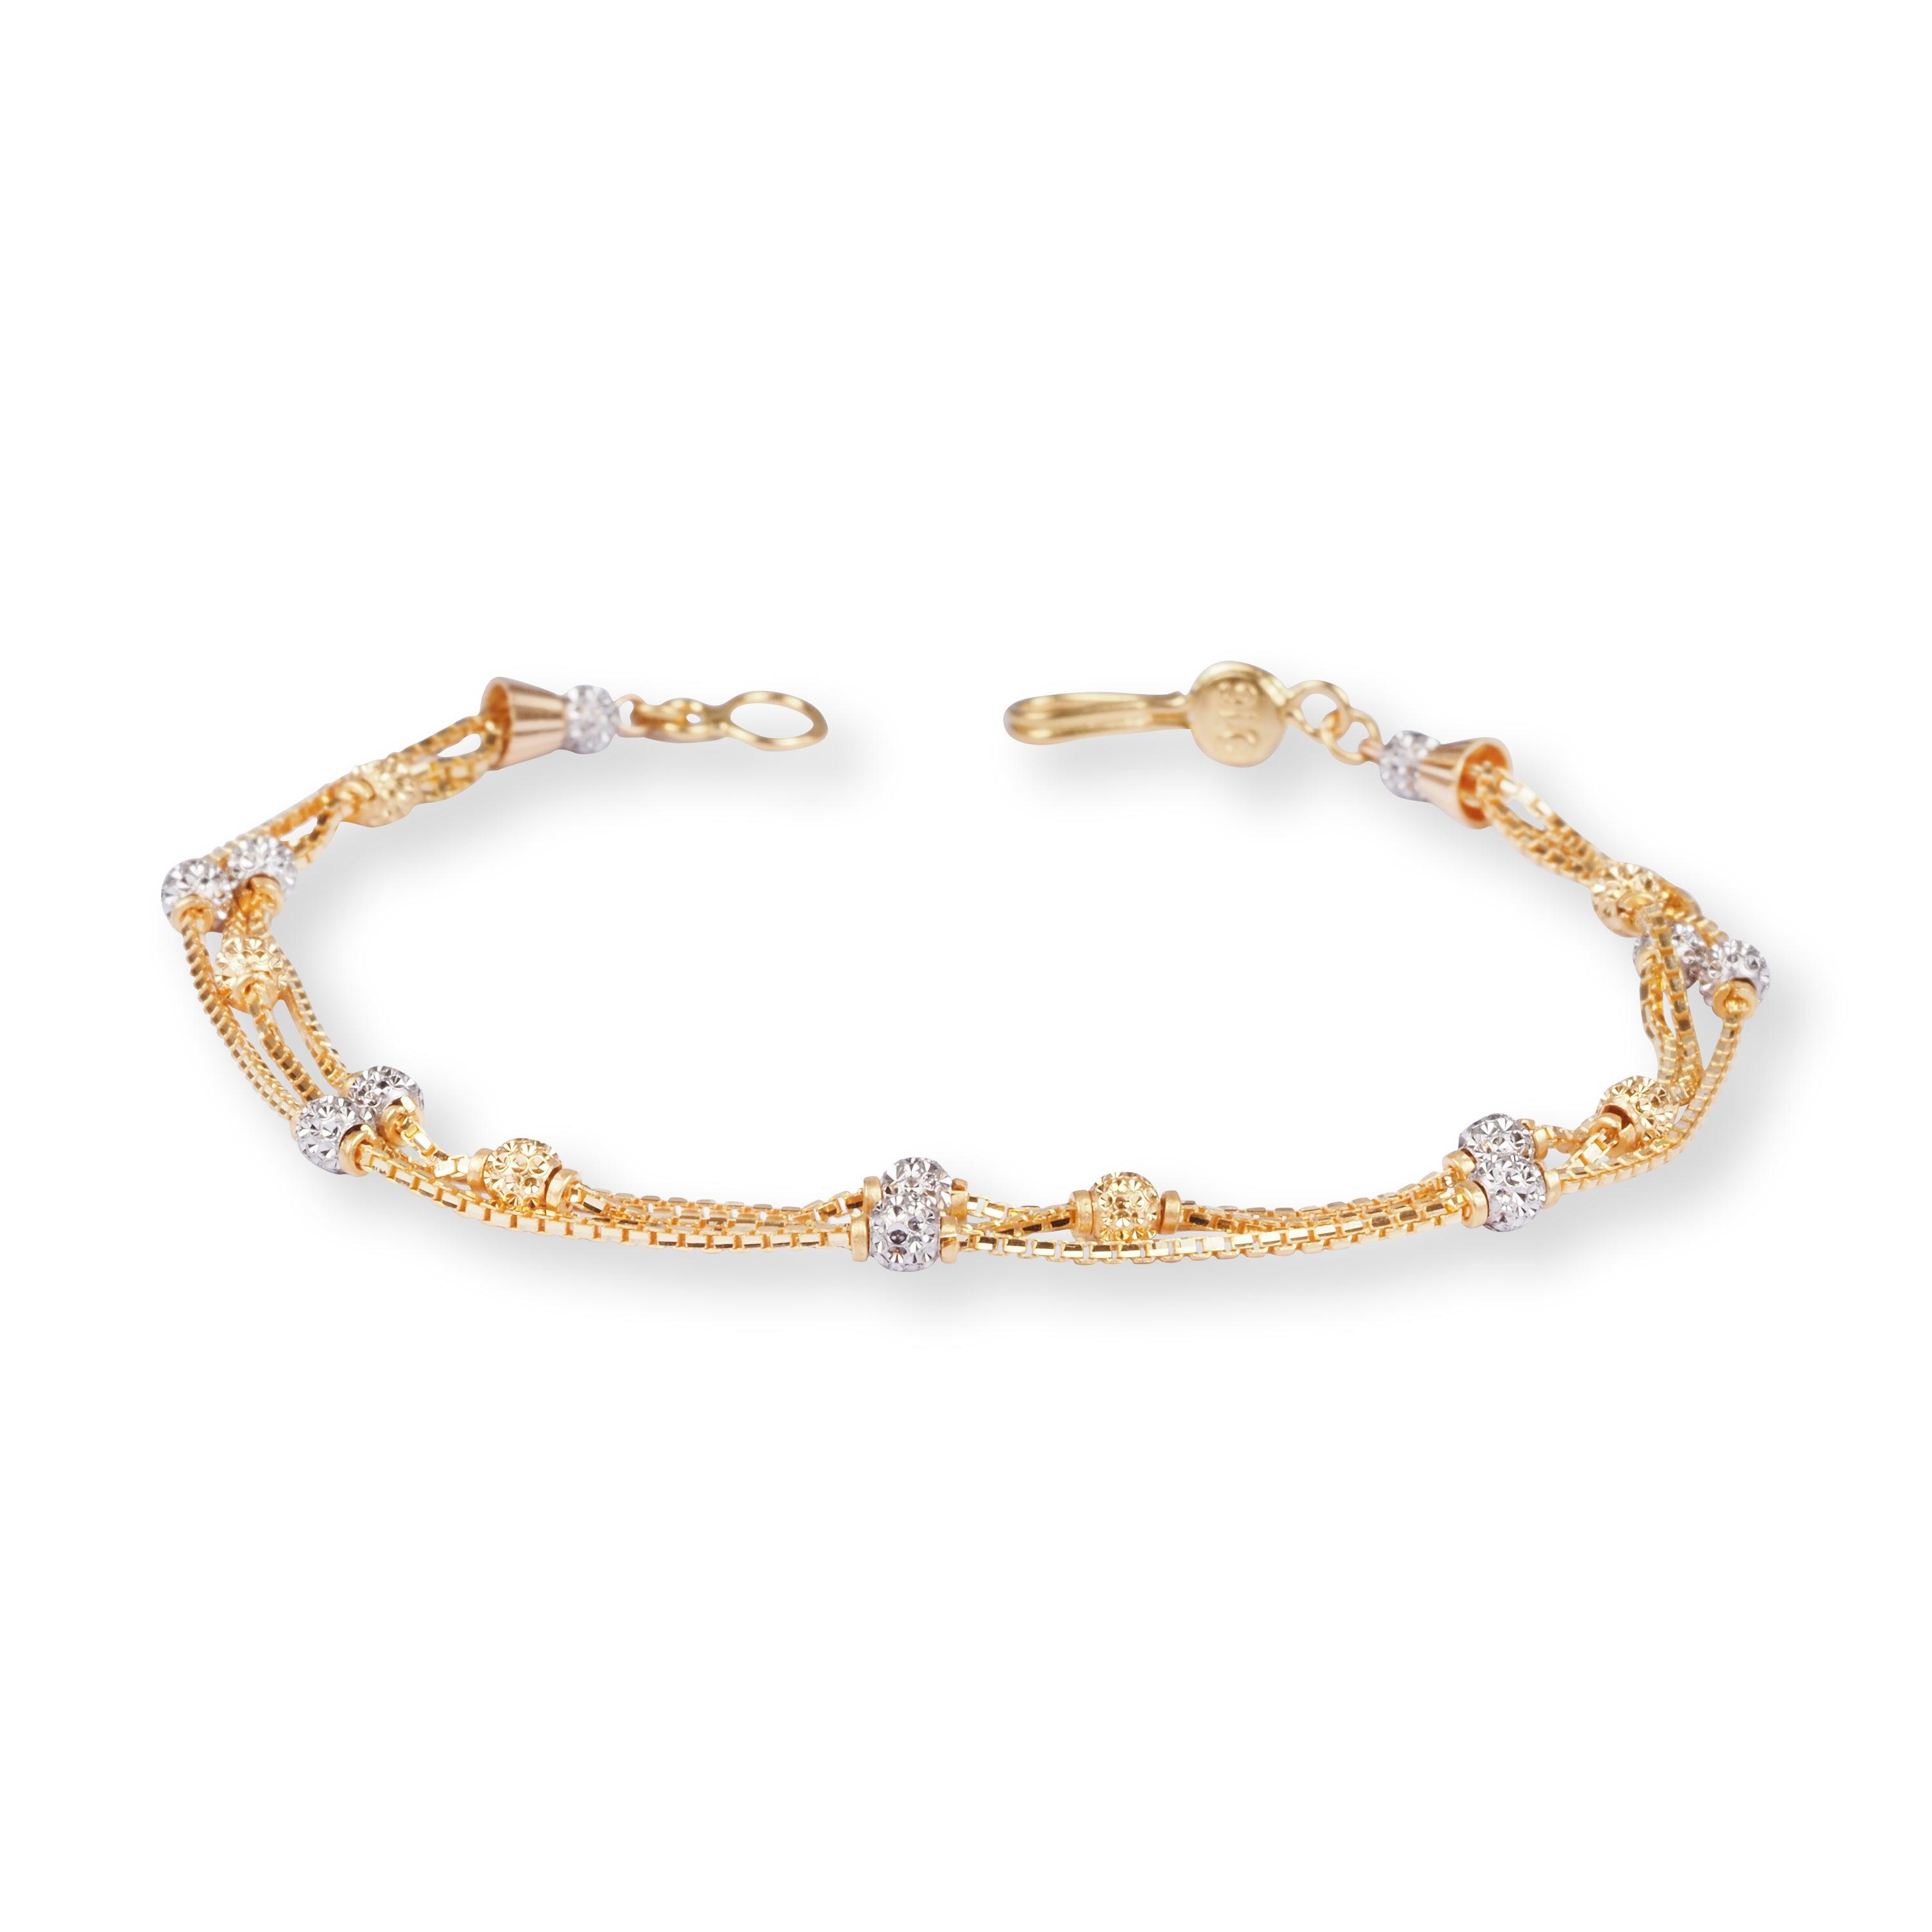 22ct Gold Three Row Bracelet with Plain and Rhodium Diamond Cut Beads and Hook Clasp LBR-8501 - Minar Jewellers